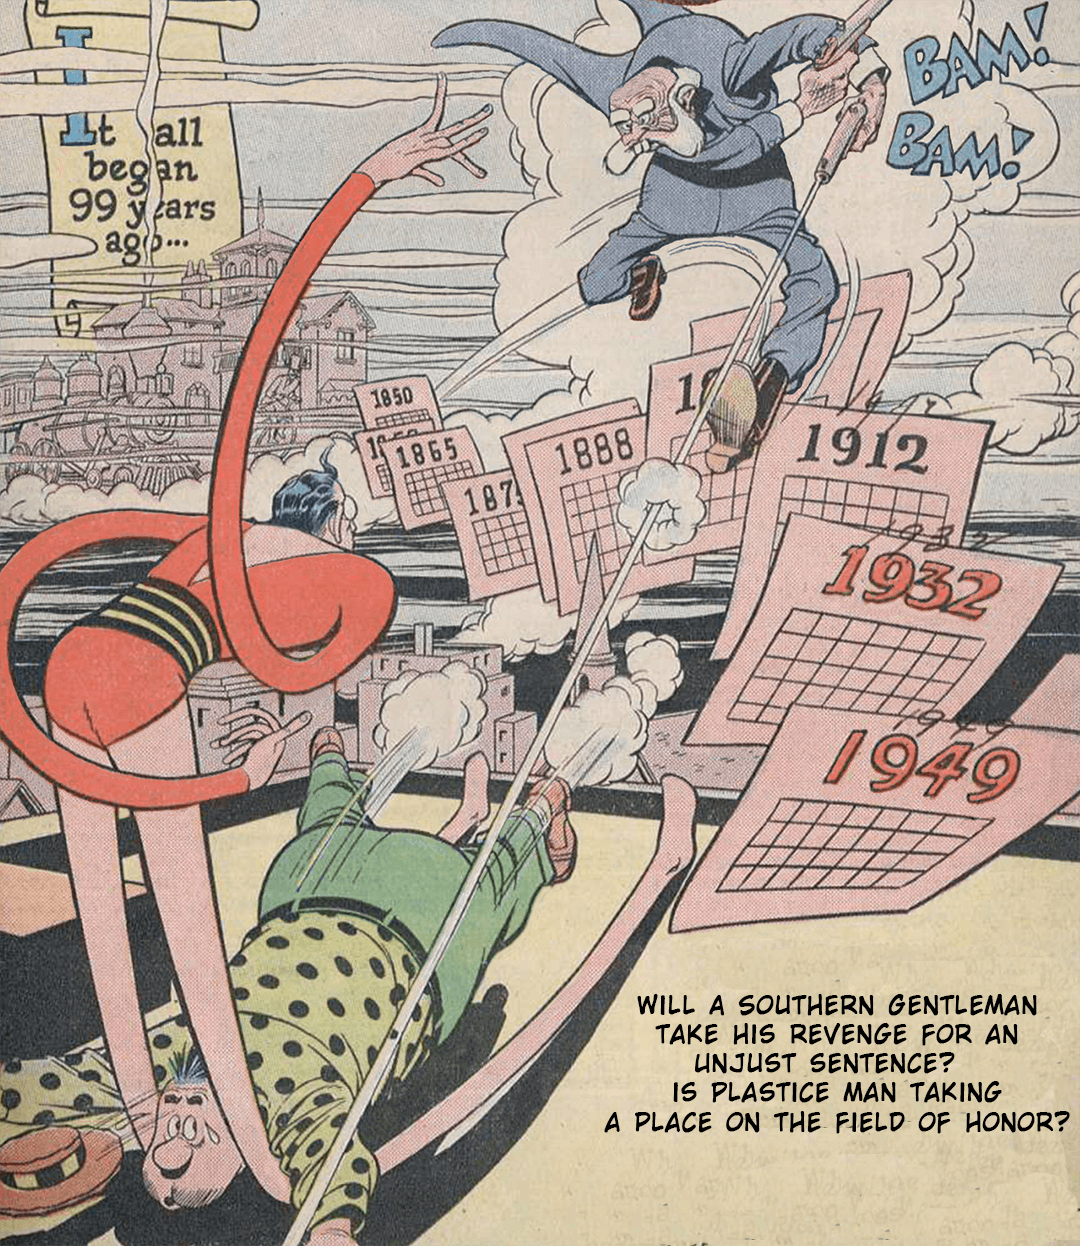 Plastic Man, 99 years #1 - A Century of Vengeance image number 3